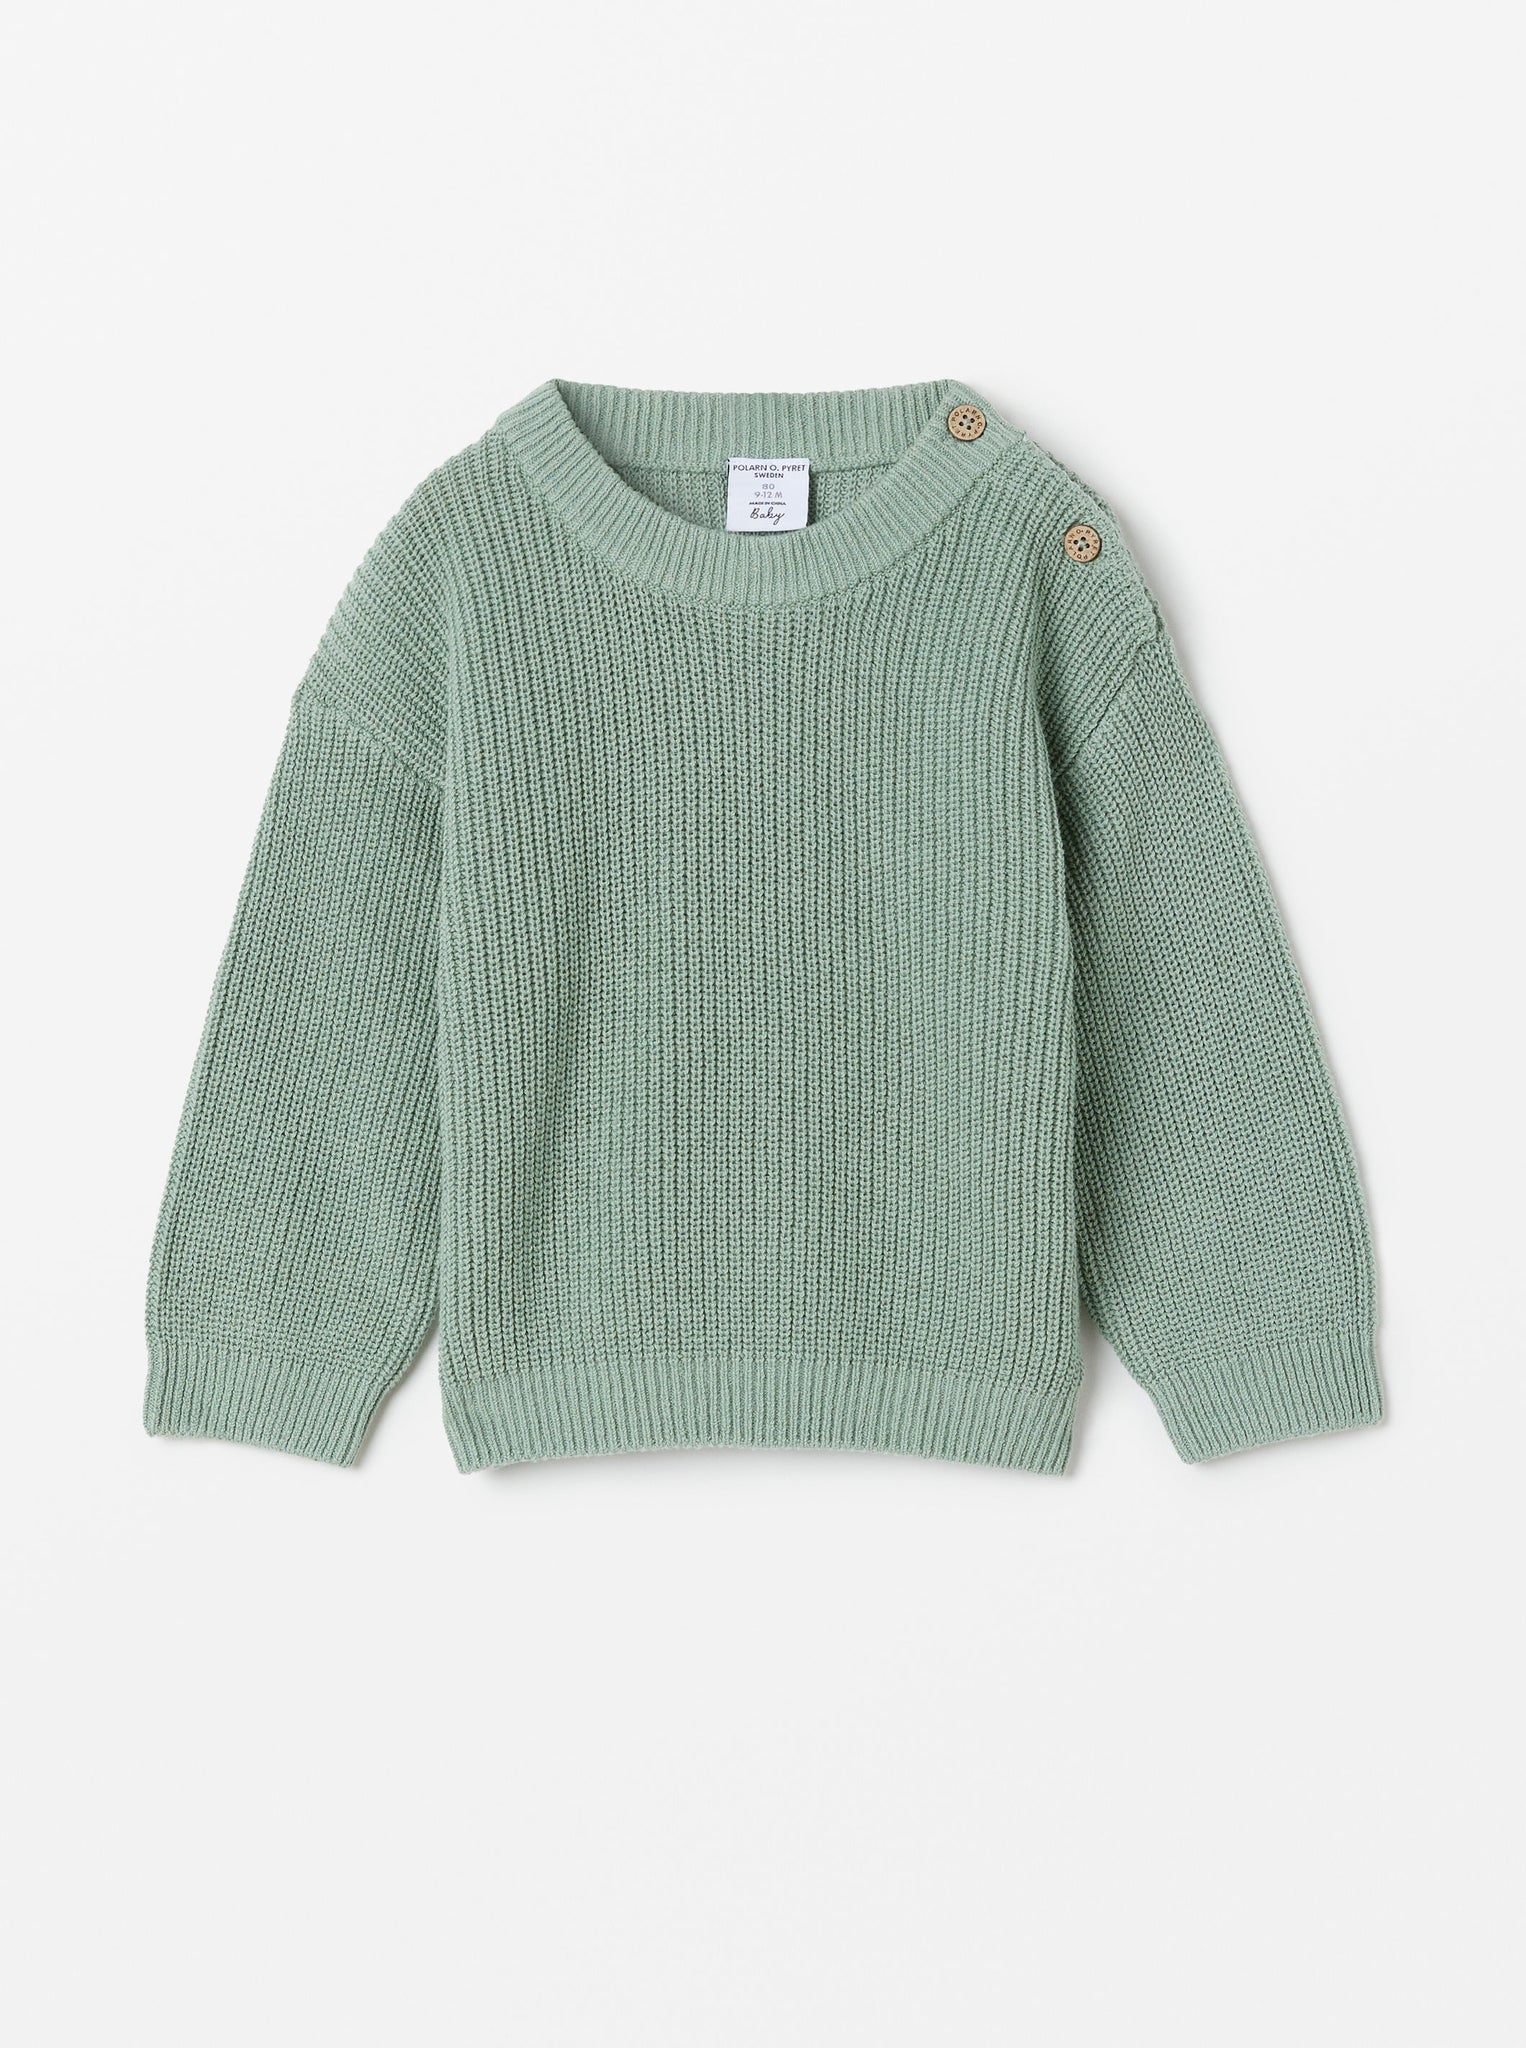 Ribbed Green Knitted Baby Jumper from the Polarn O. Pyret babywear collection. The best ethical baby clothes